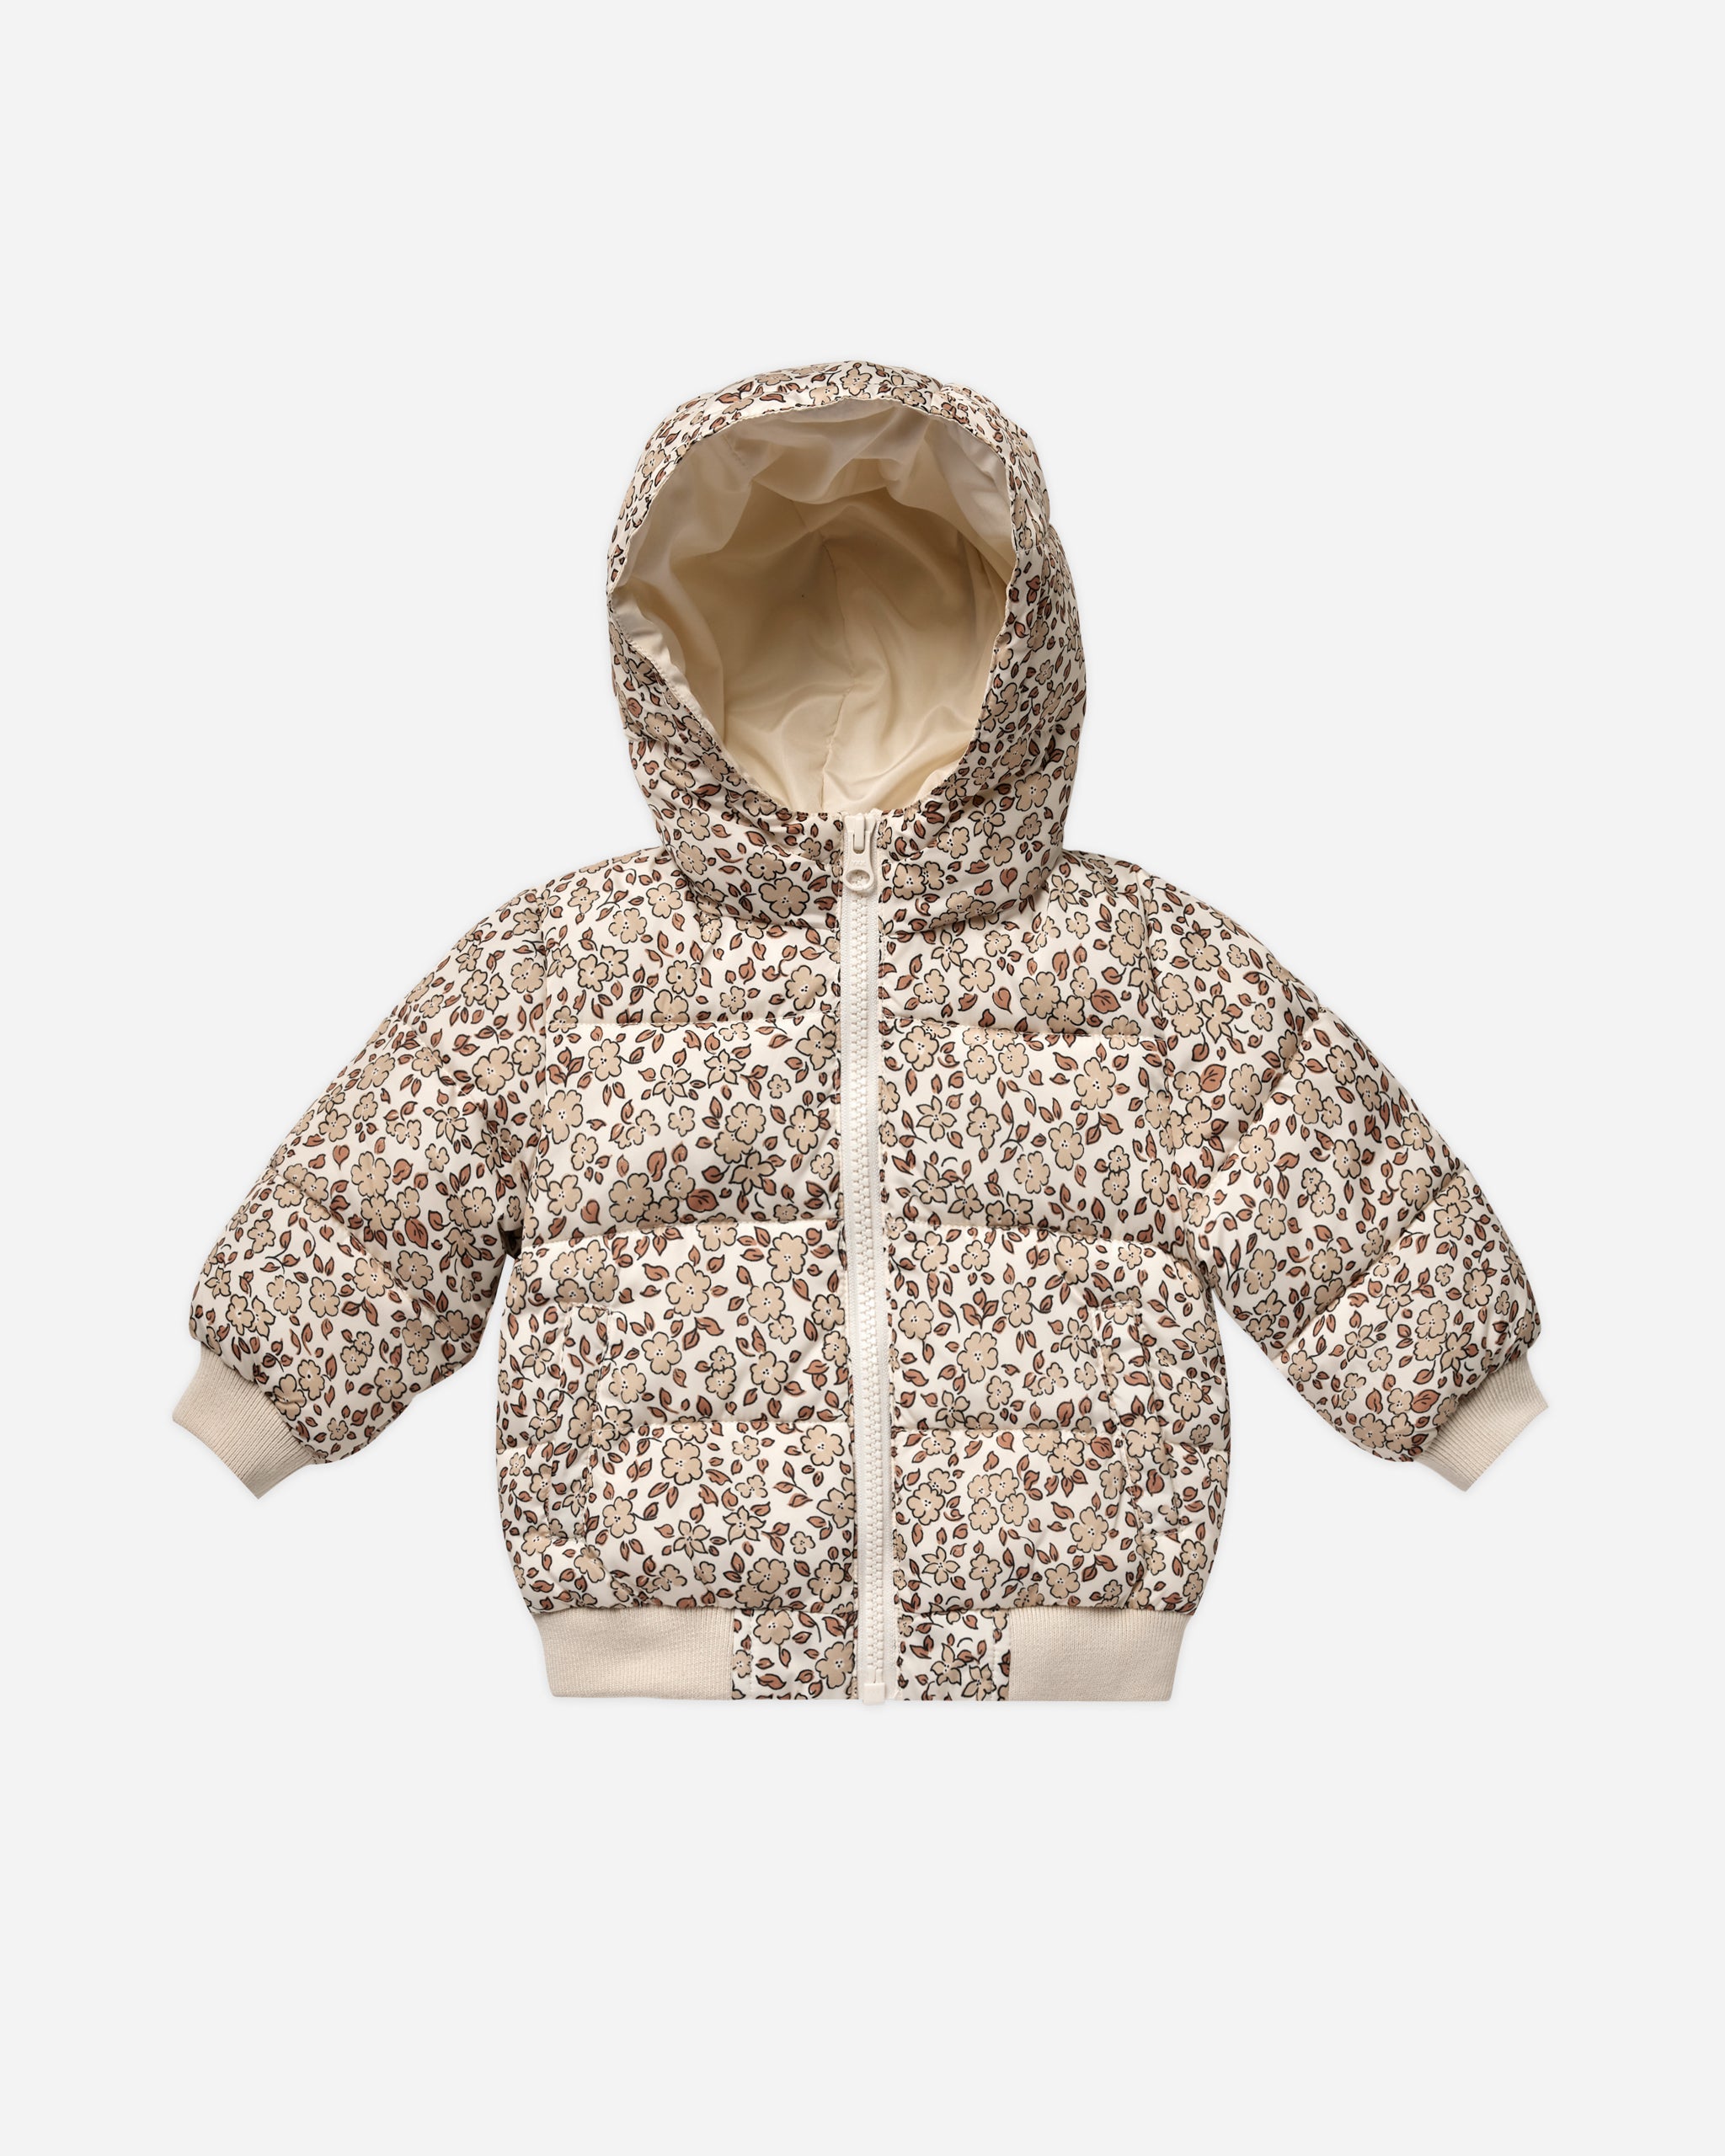 Puffer Jacket || Harvest Floral - Rylee + Cru | Kids Clothes | Trendy Baby Clothes | Modern Infant Outfits |